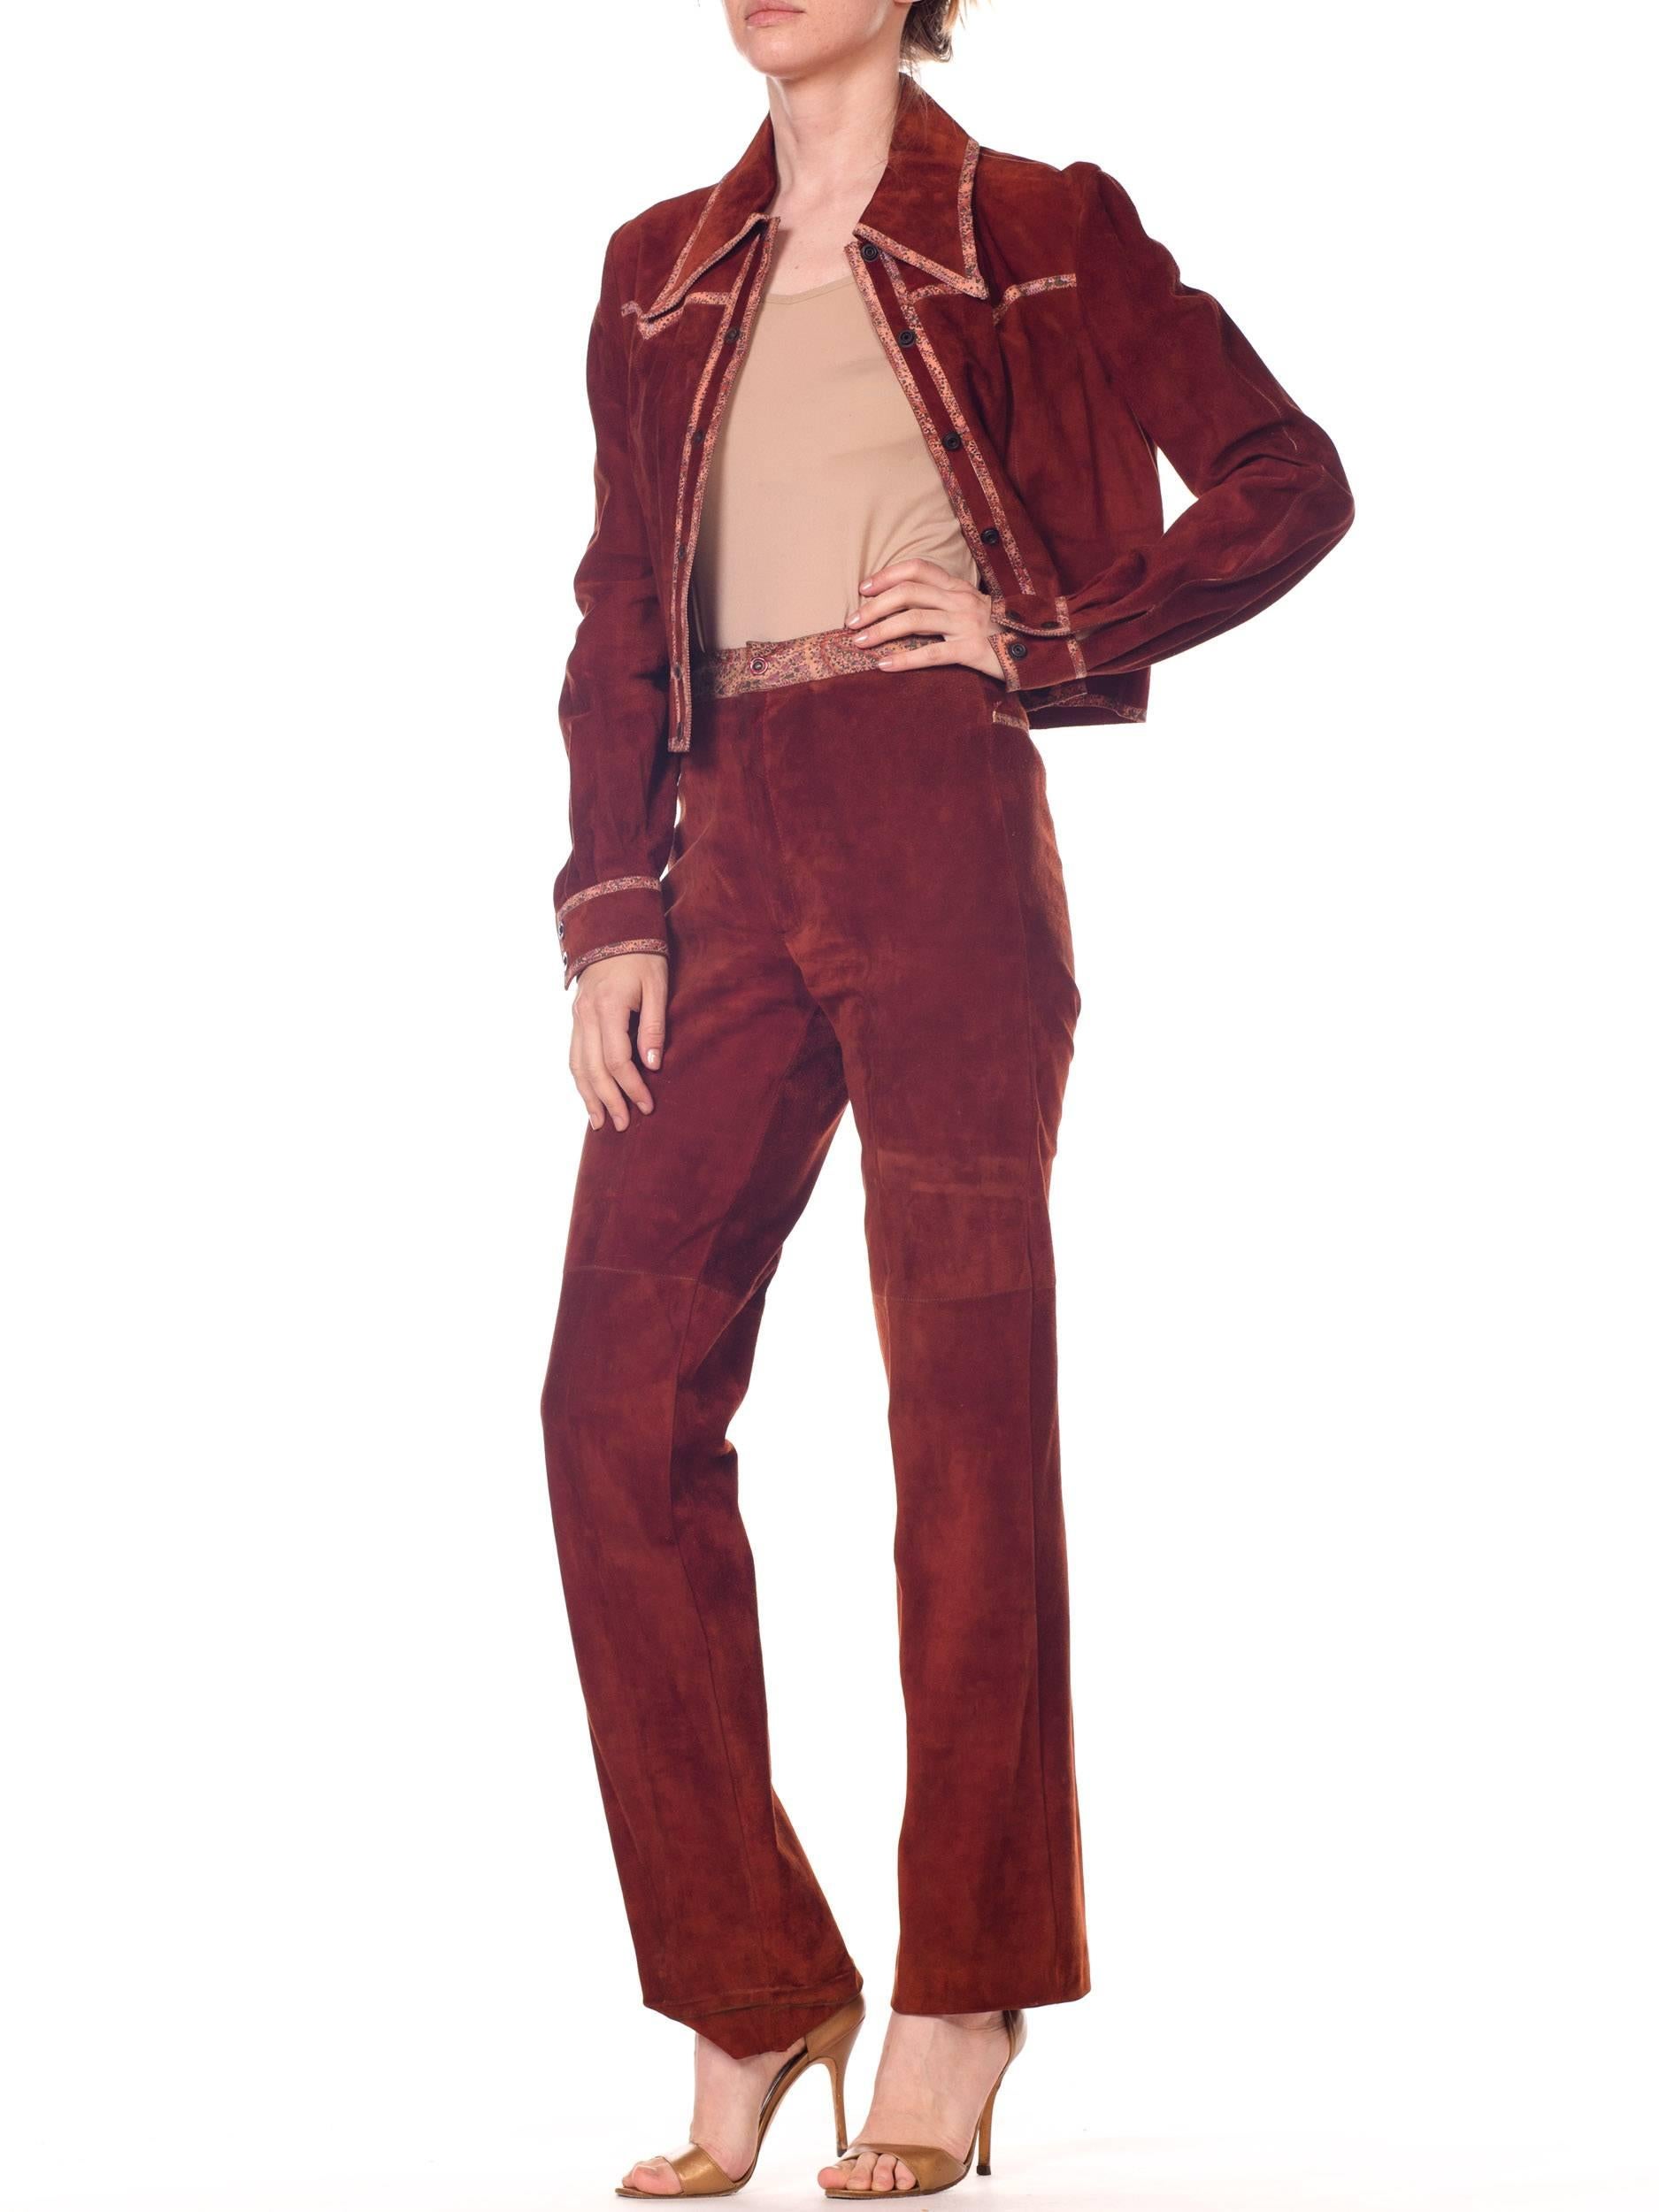 Roberto Cavalli Cognac Suede Pants and Jacket set with printed trims 2